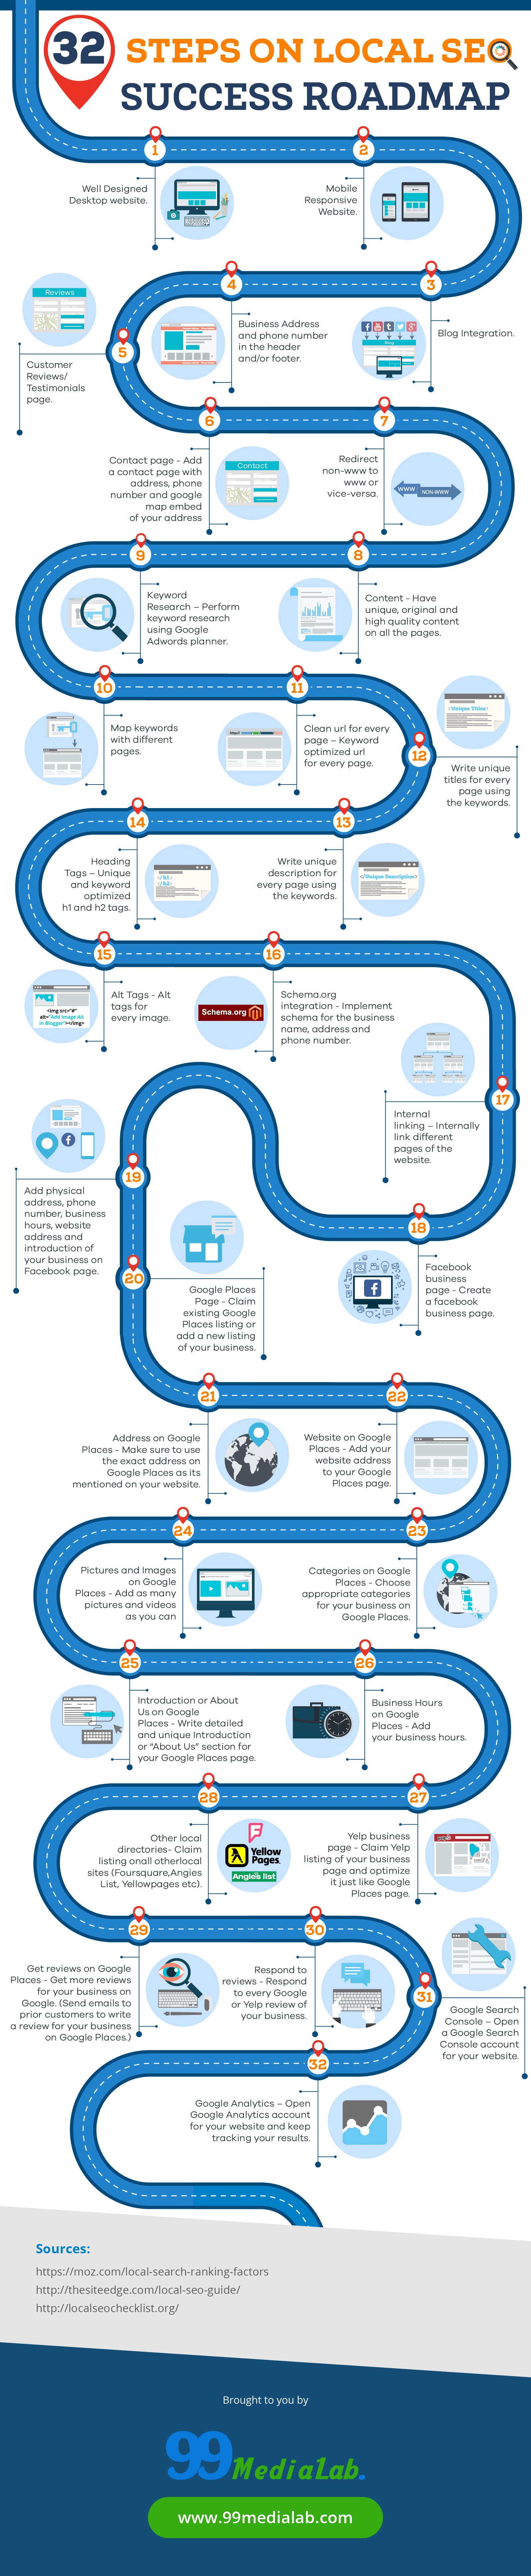 32-Step Success Roadmap For Local SEO [Infographic]